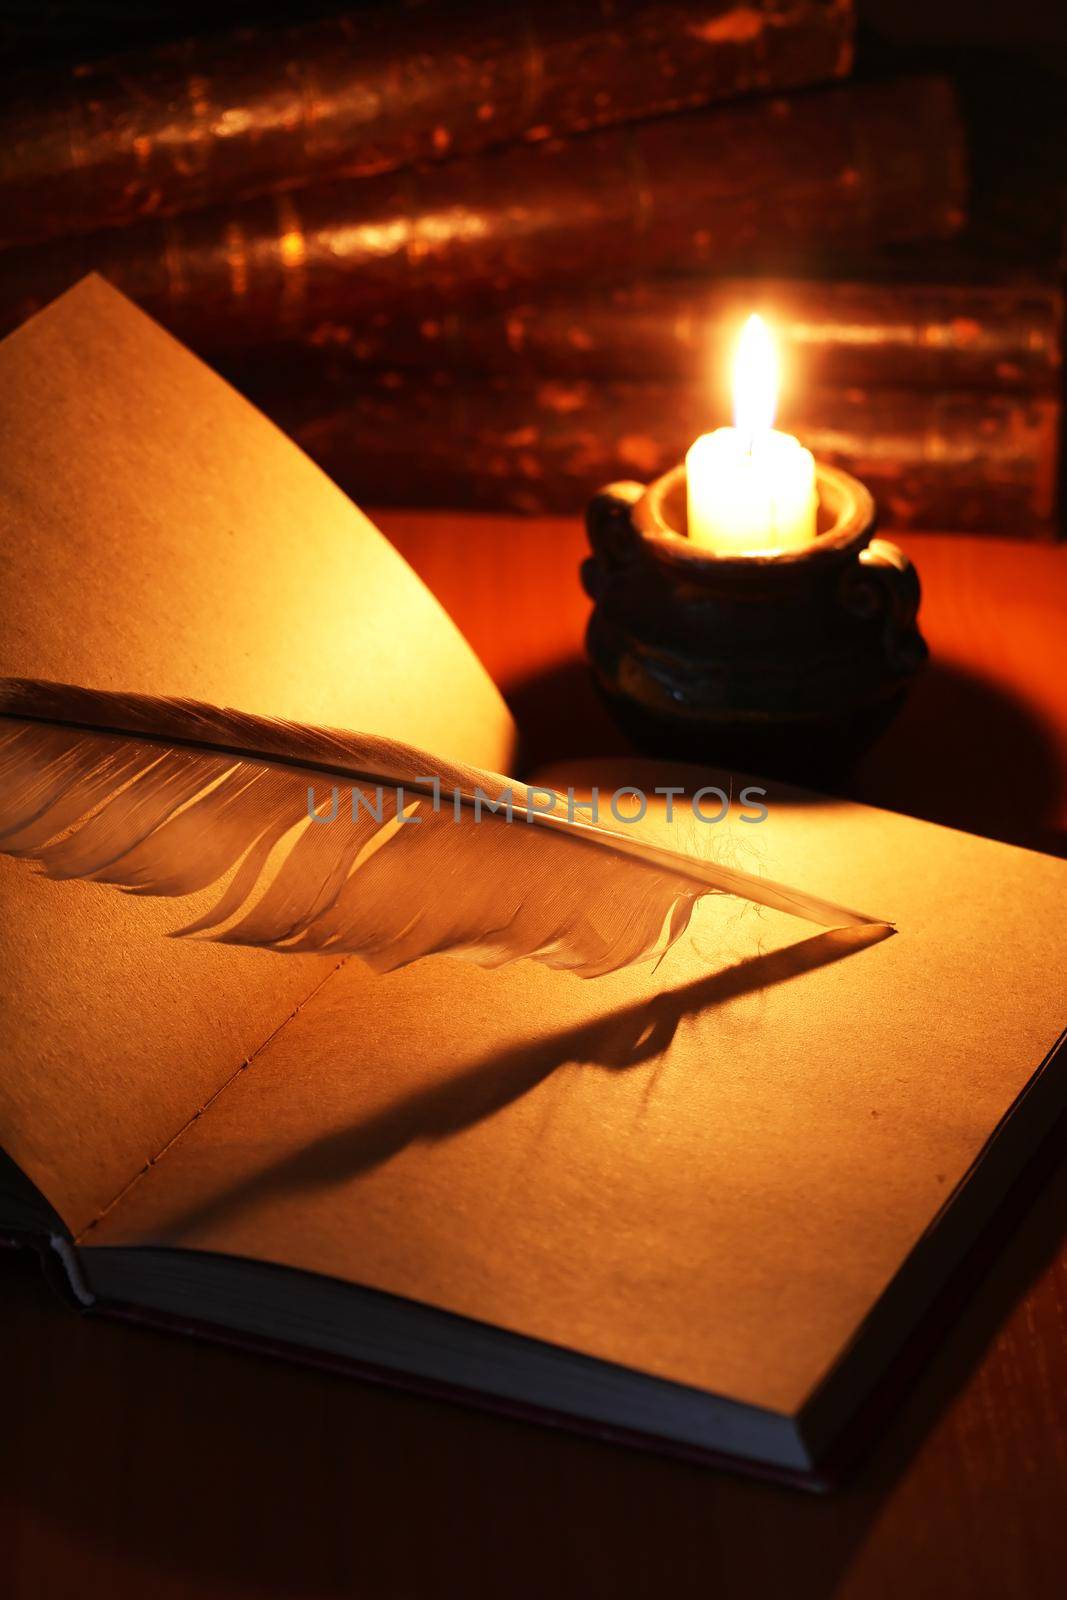 Vintage still life with open book and quill pen near lighting candle